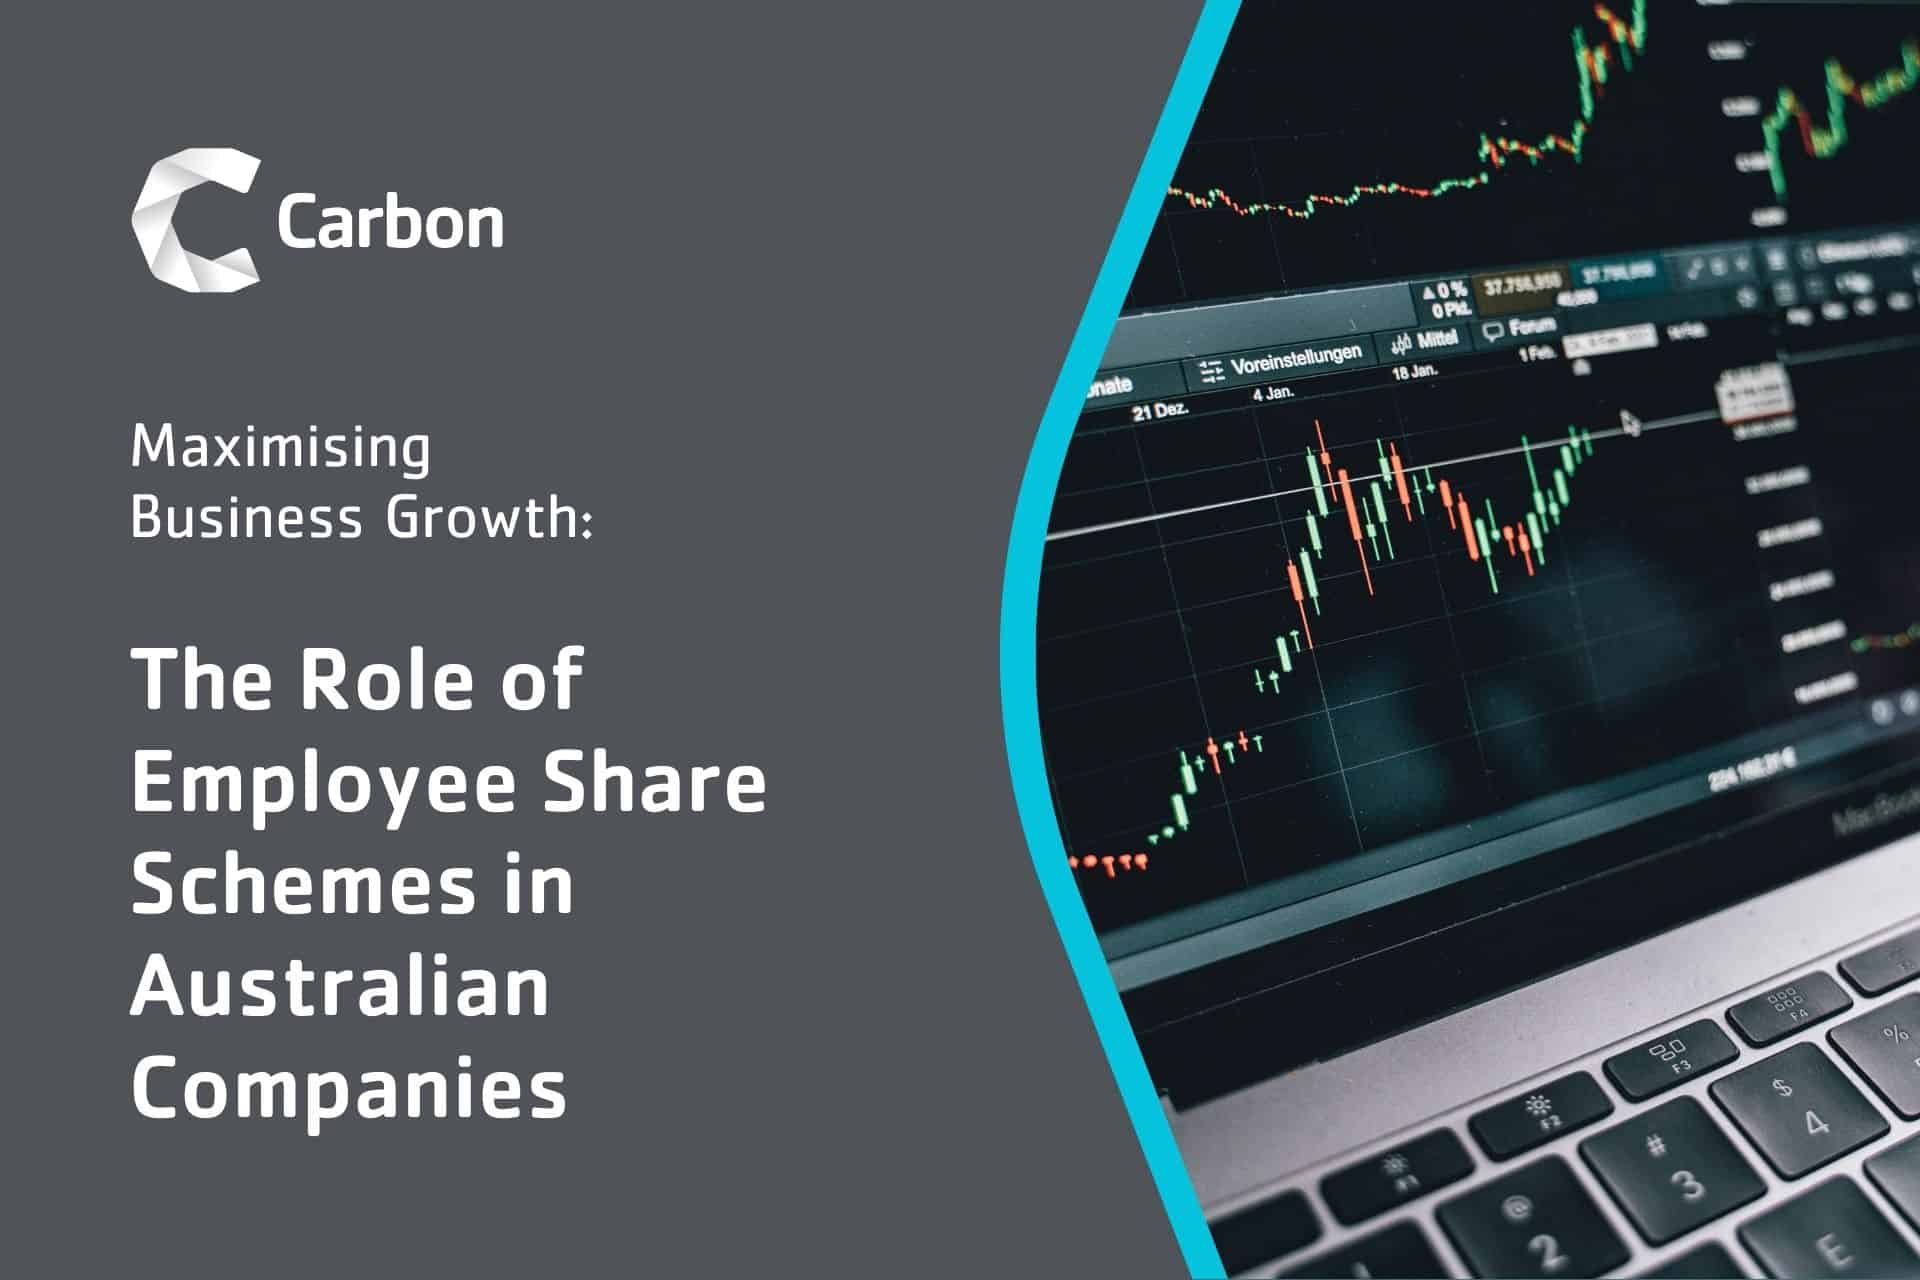 Maximising Business Growth: The Role of Employee Share Schemes in Australian Companies